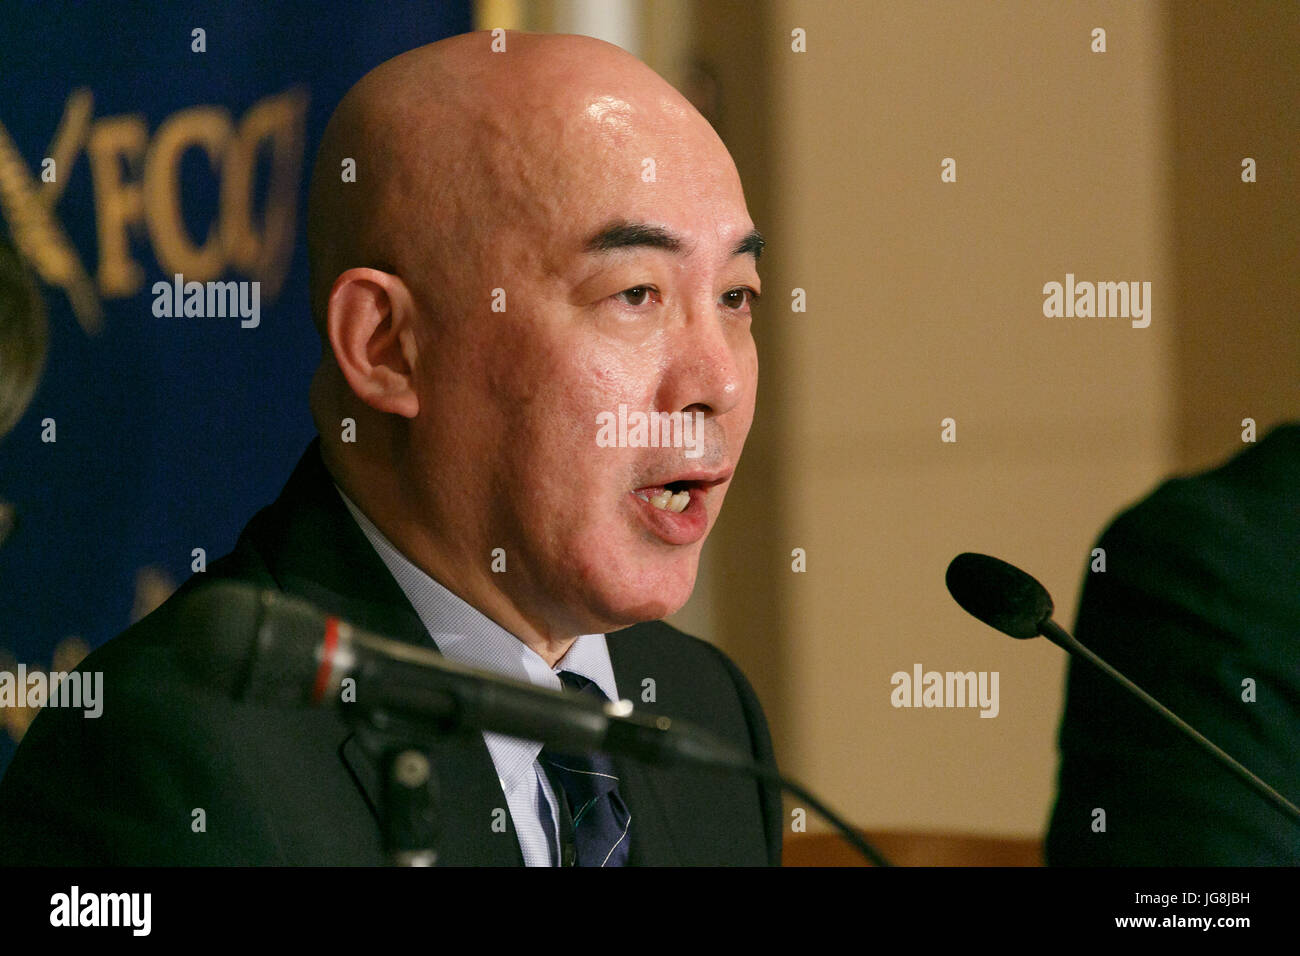 Japanese author Naoki Hyakuta speaks during a news conference at The Foreign Correspondents' Club of Japan on July 4, 2017, Tokyo, Japan. Hyakuta, who's views include denial of the Nanking massacre, spoke about the cancellation of his lecture at Hitotsubashi University because a group of students, belonging to the school's Anti-Racism Information Center (ARIC), had argued that his views were discriminatory toward certain ethnic groups and that he shouldn't be allowed to speak at the University festival. Credit: Rodrigo Reyes Marin/AFLO/Alamy Live News Stock Photo